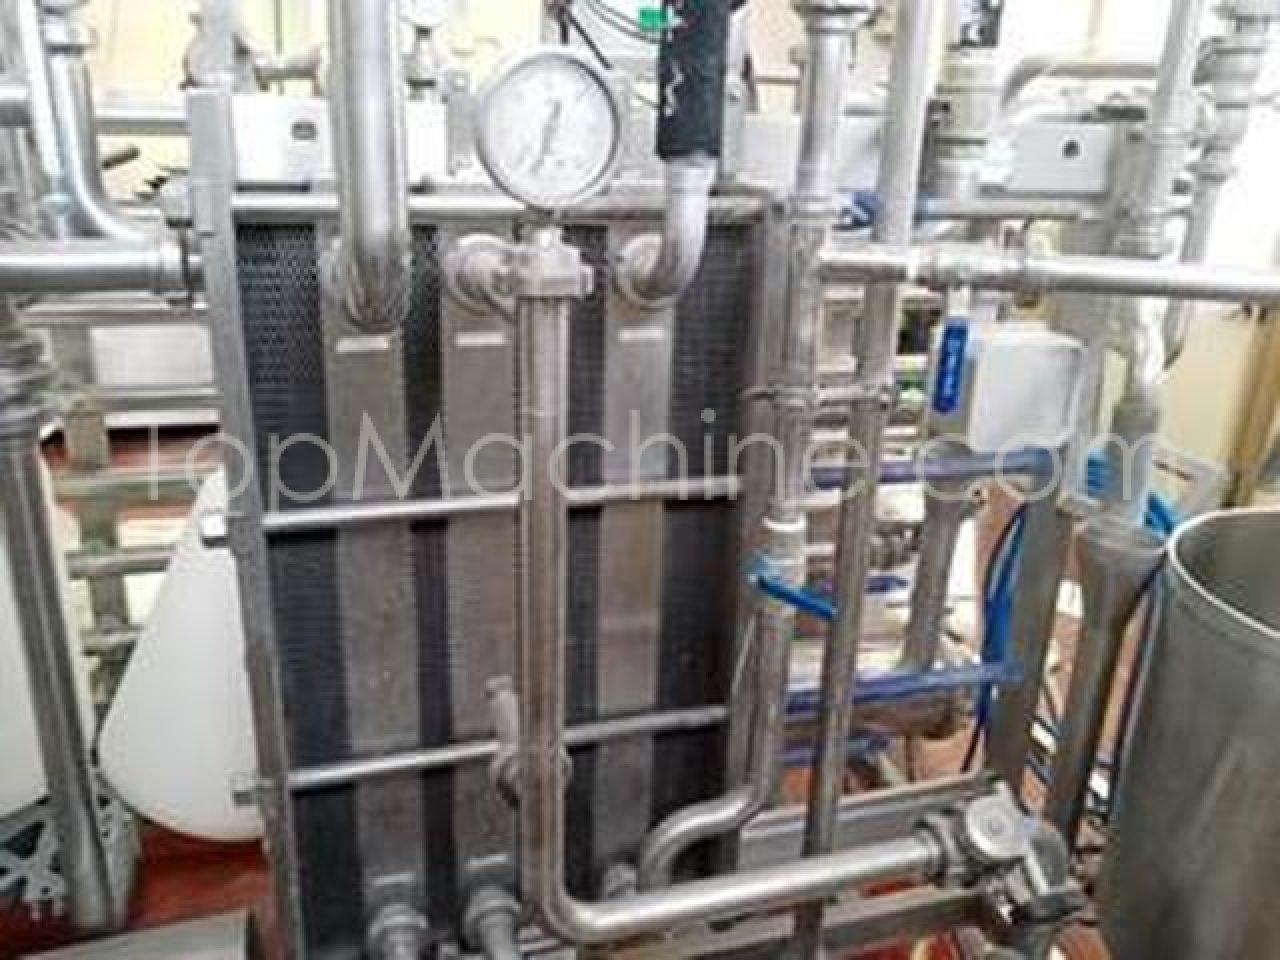 Used Scremac PAST 5000 Dairy & Juices Pasteurizer